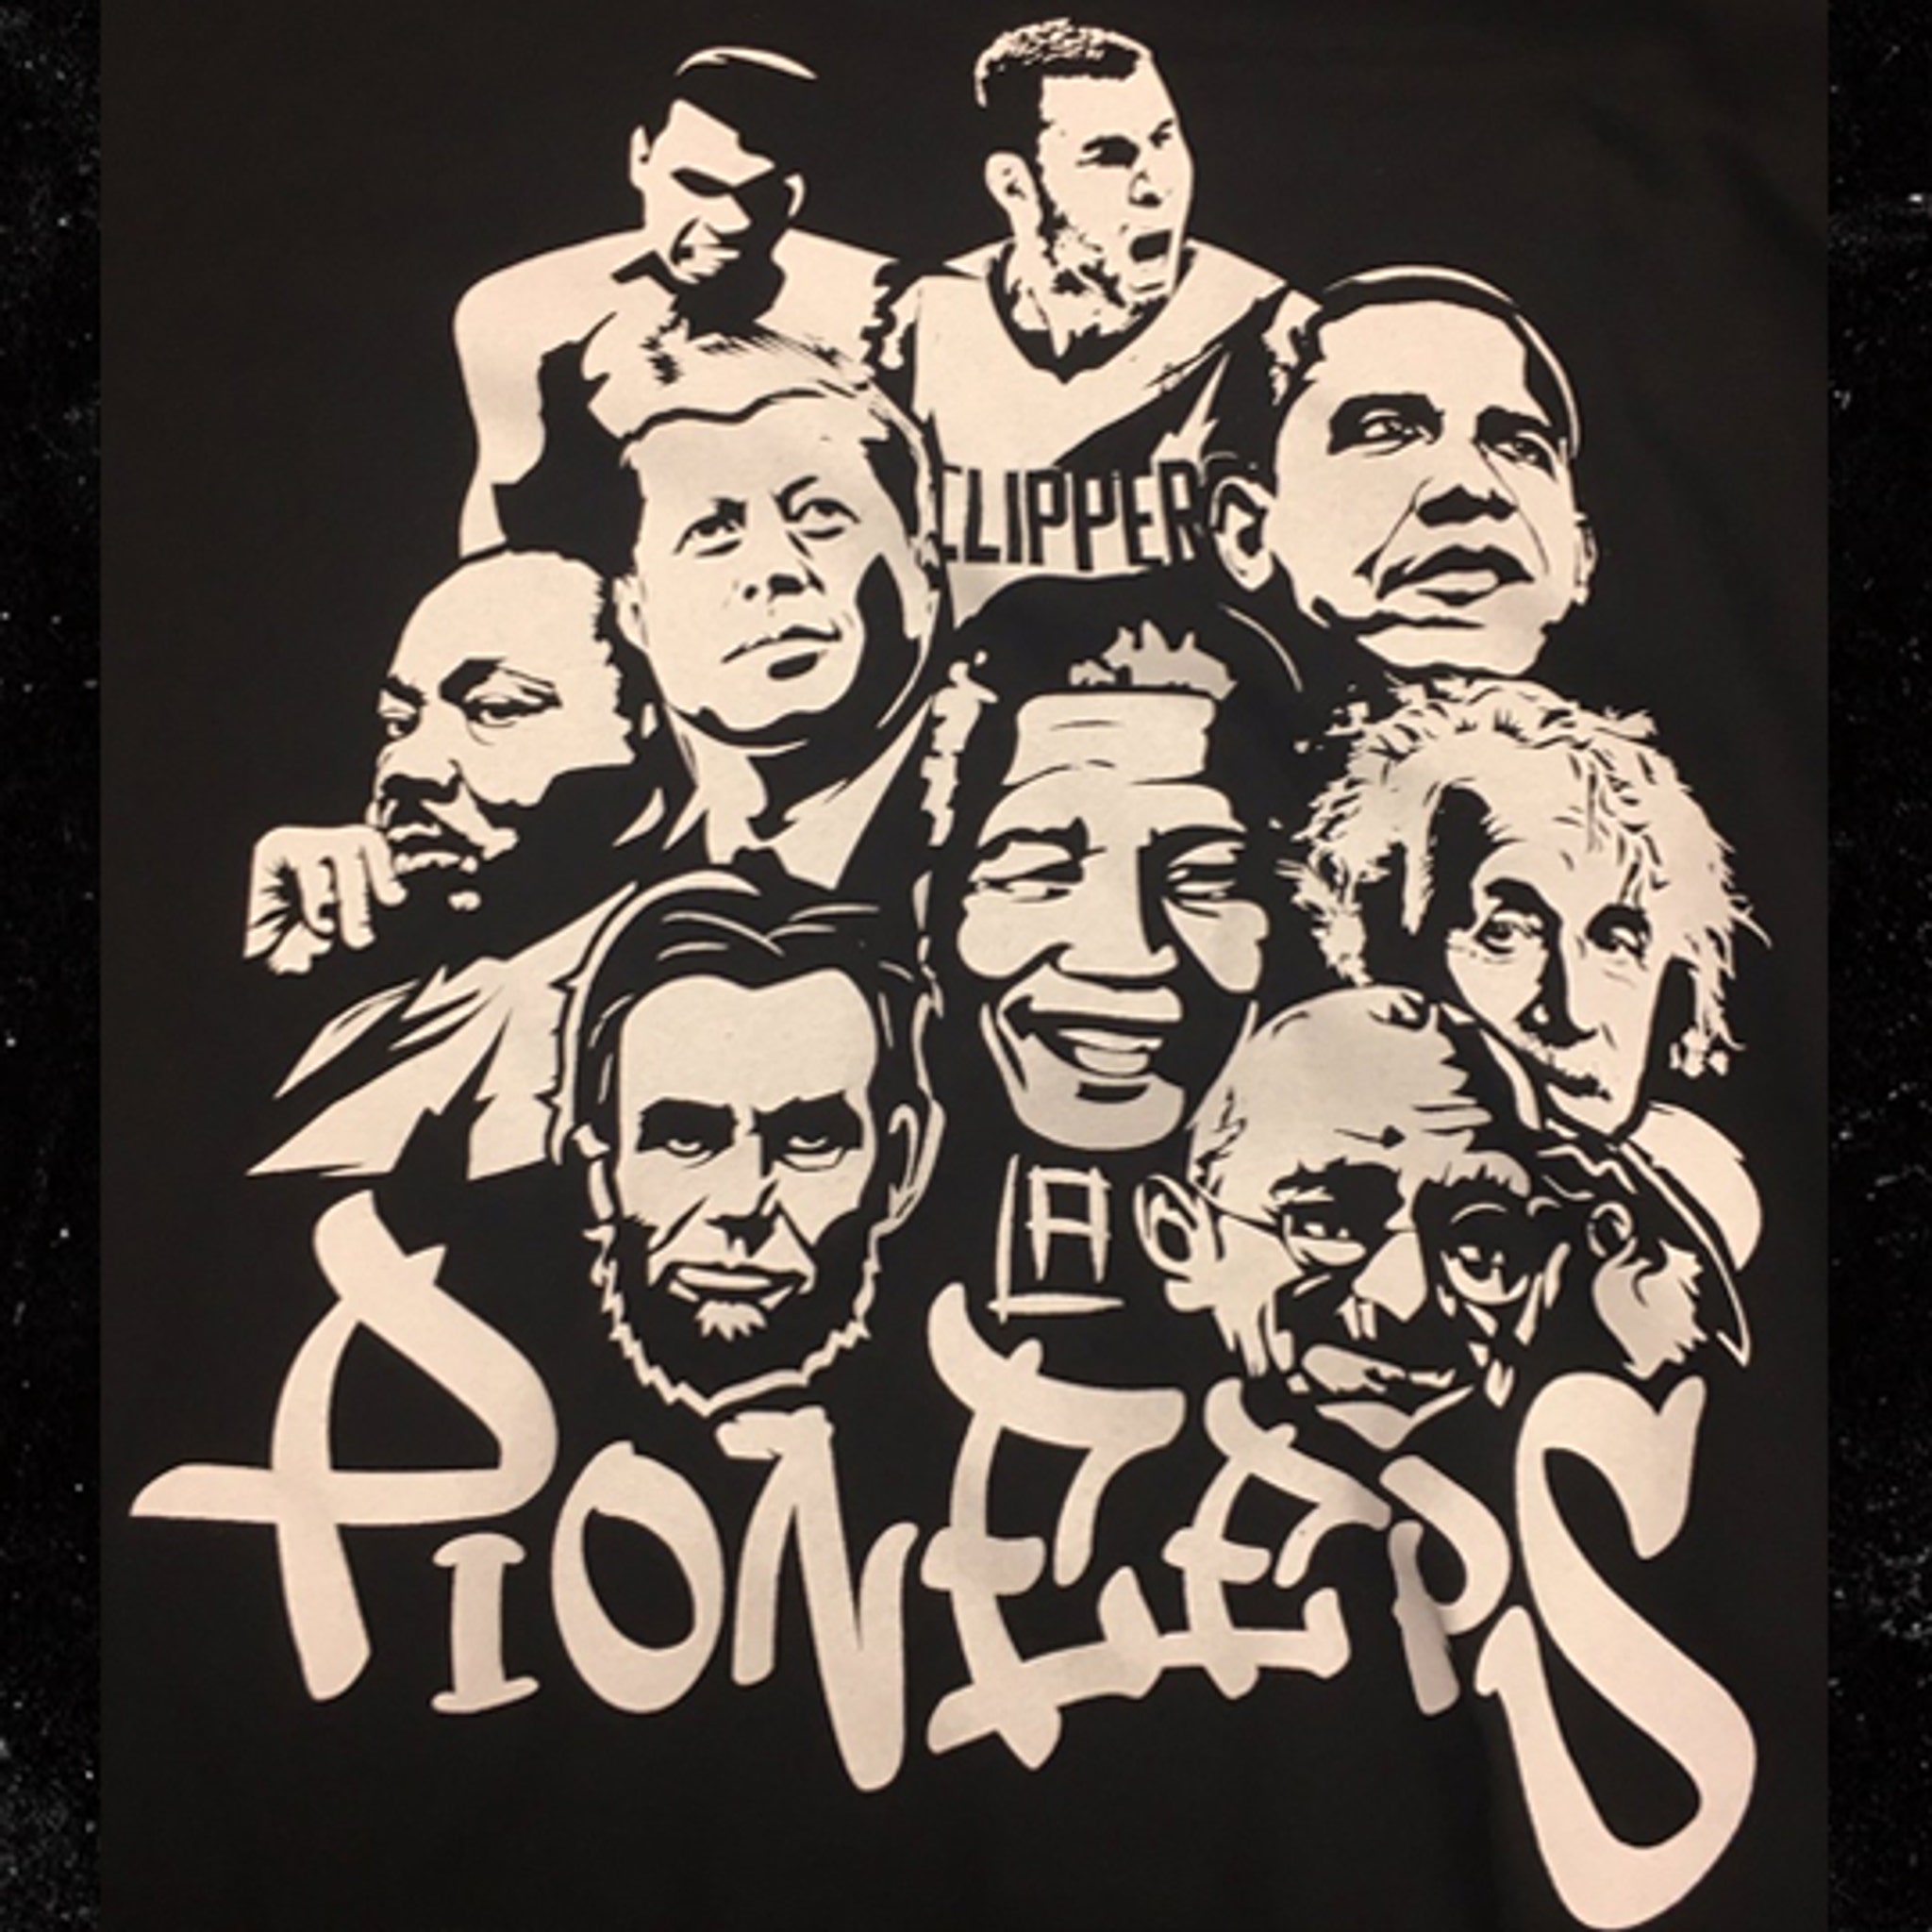 Blake Griffin Featured on Controversial LA Clippers T-Shirt with MLK,  Lincoln, Gandhi and More